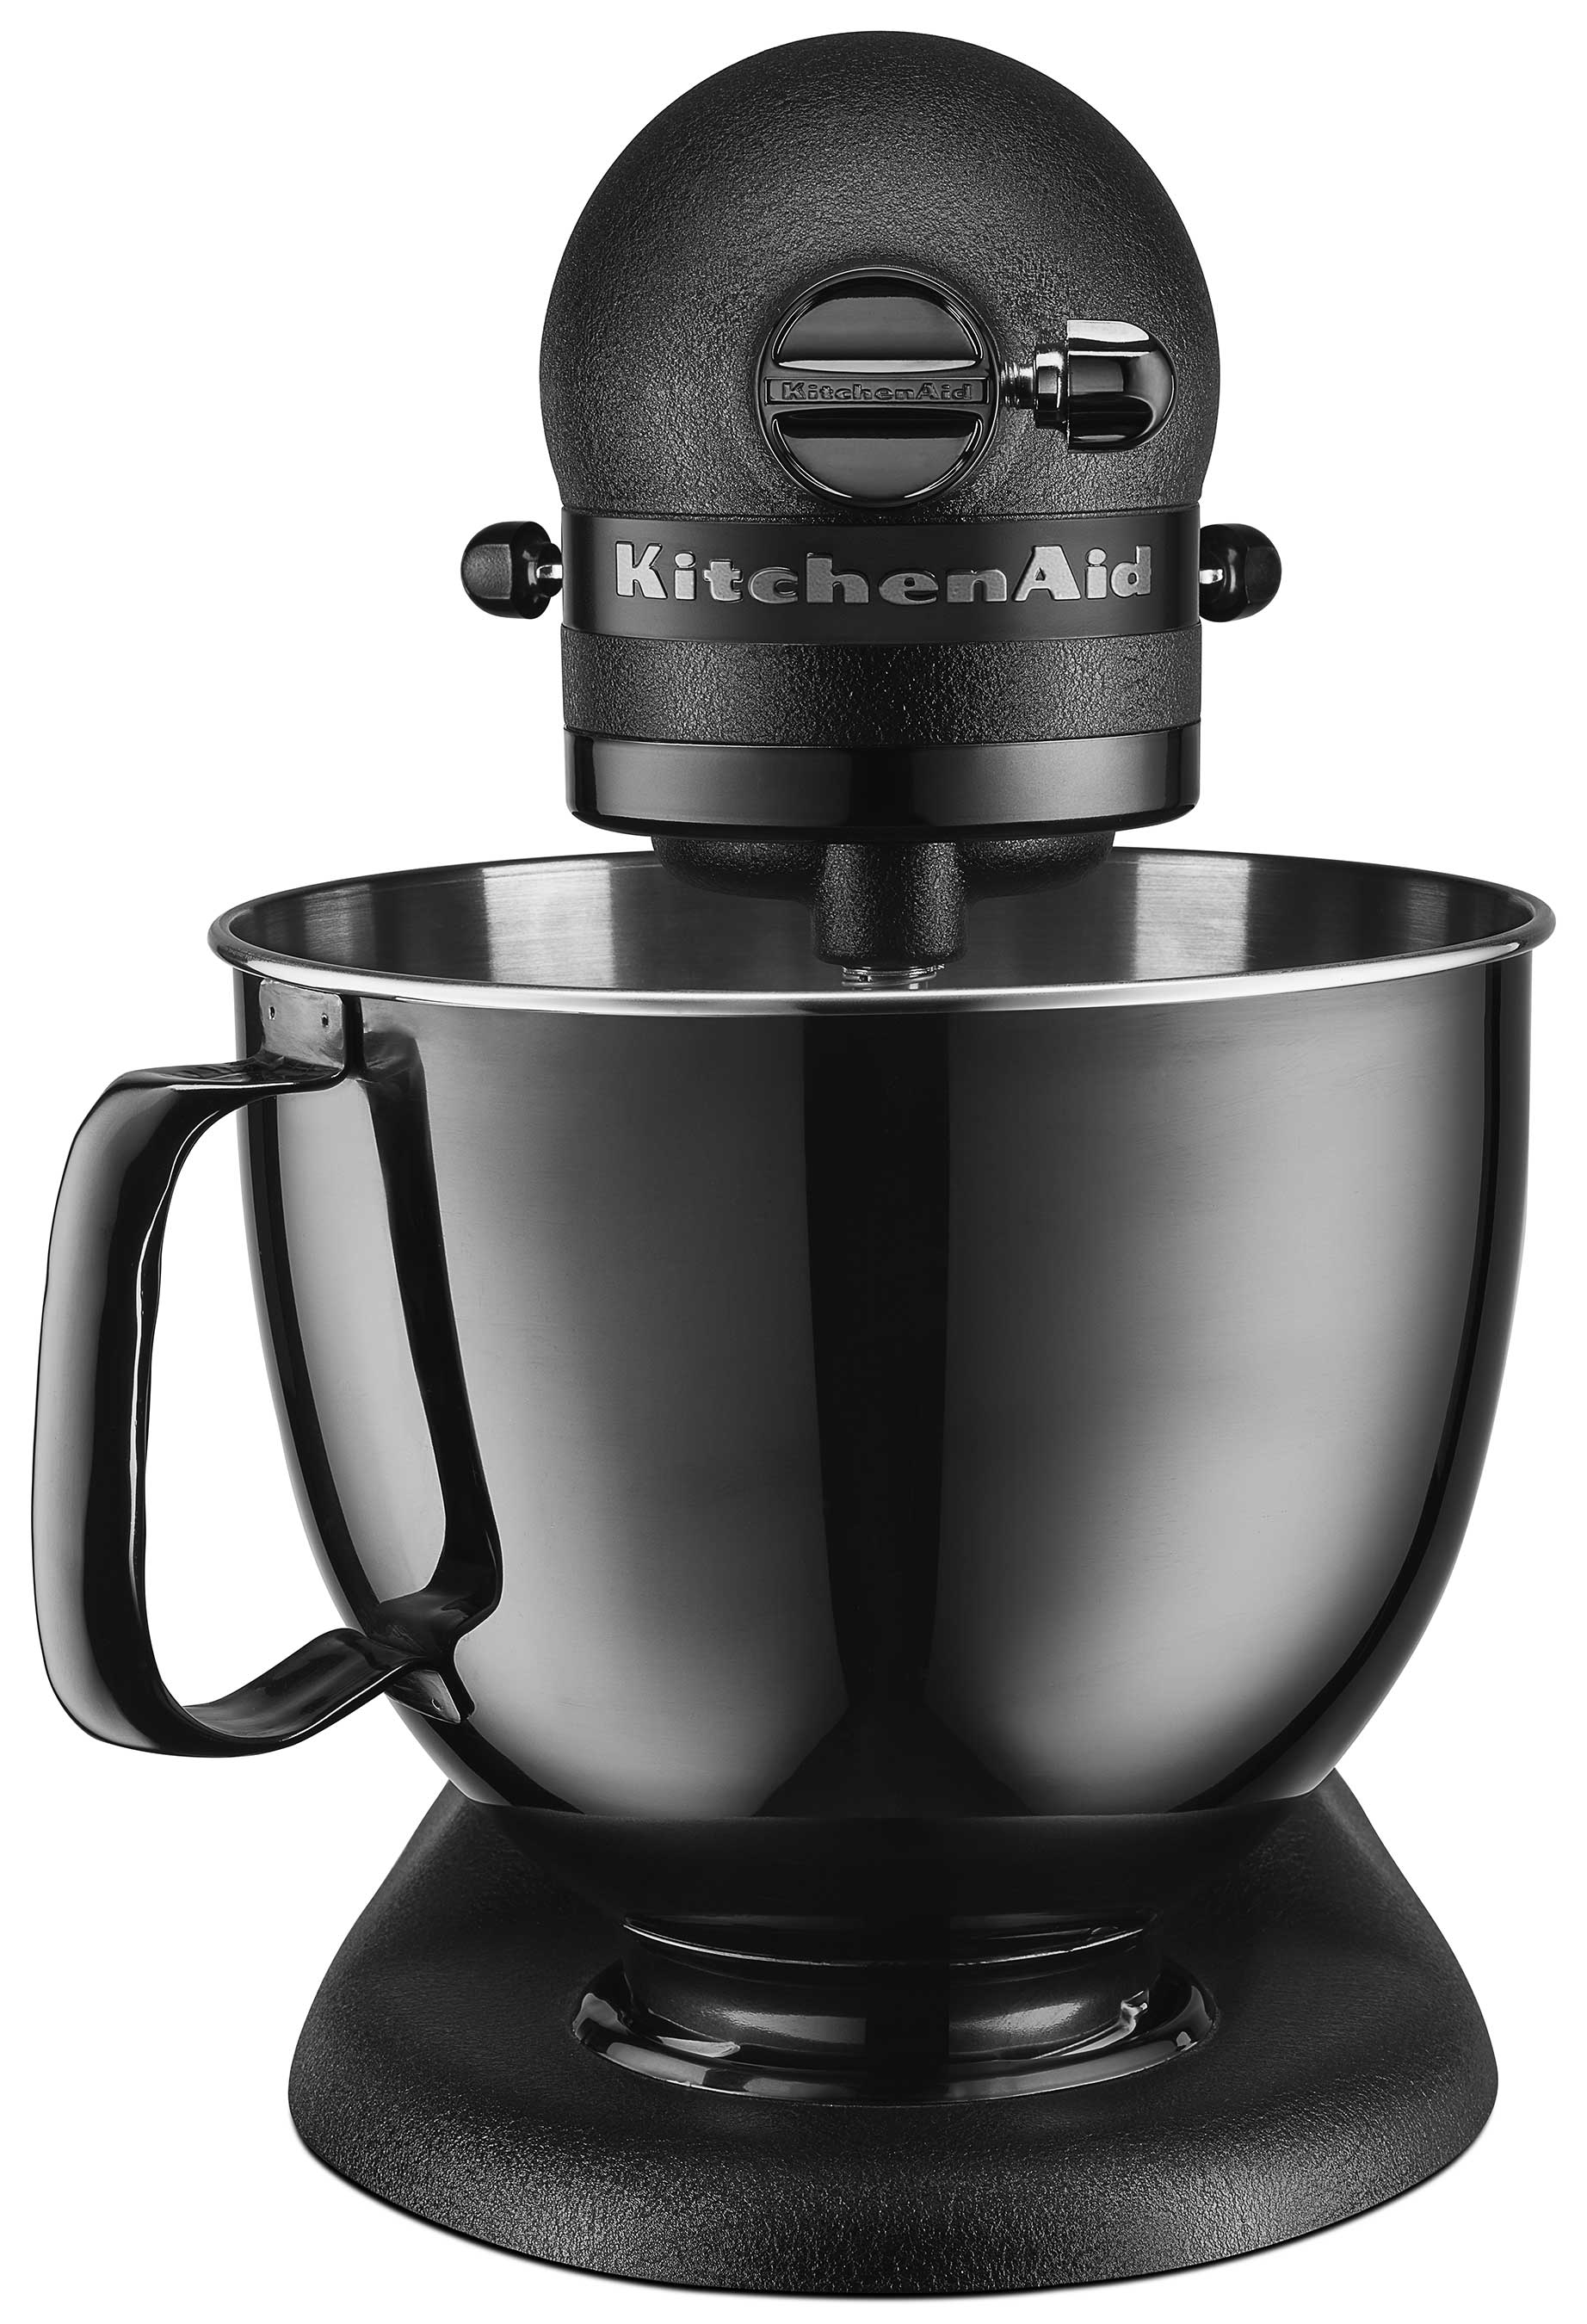 Kitchenaid Introduces Limited Edition Artisan® Black Tie Stand Mixer